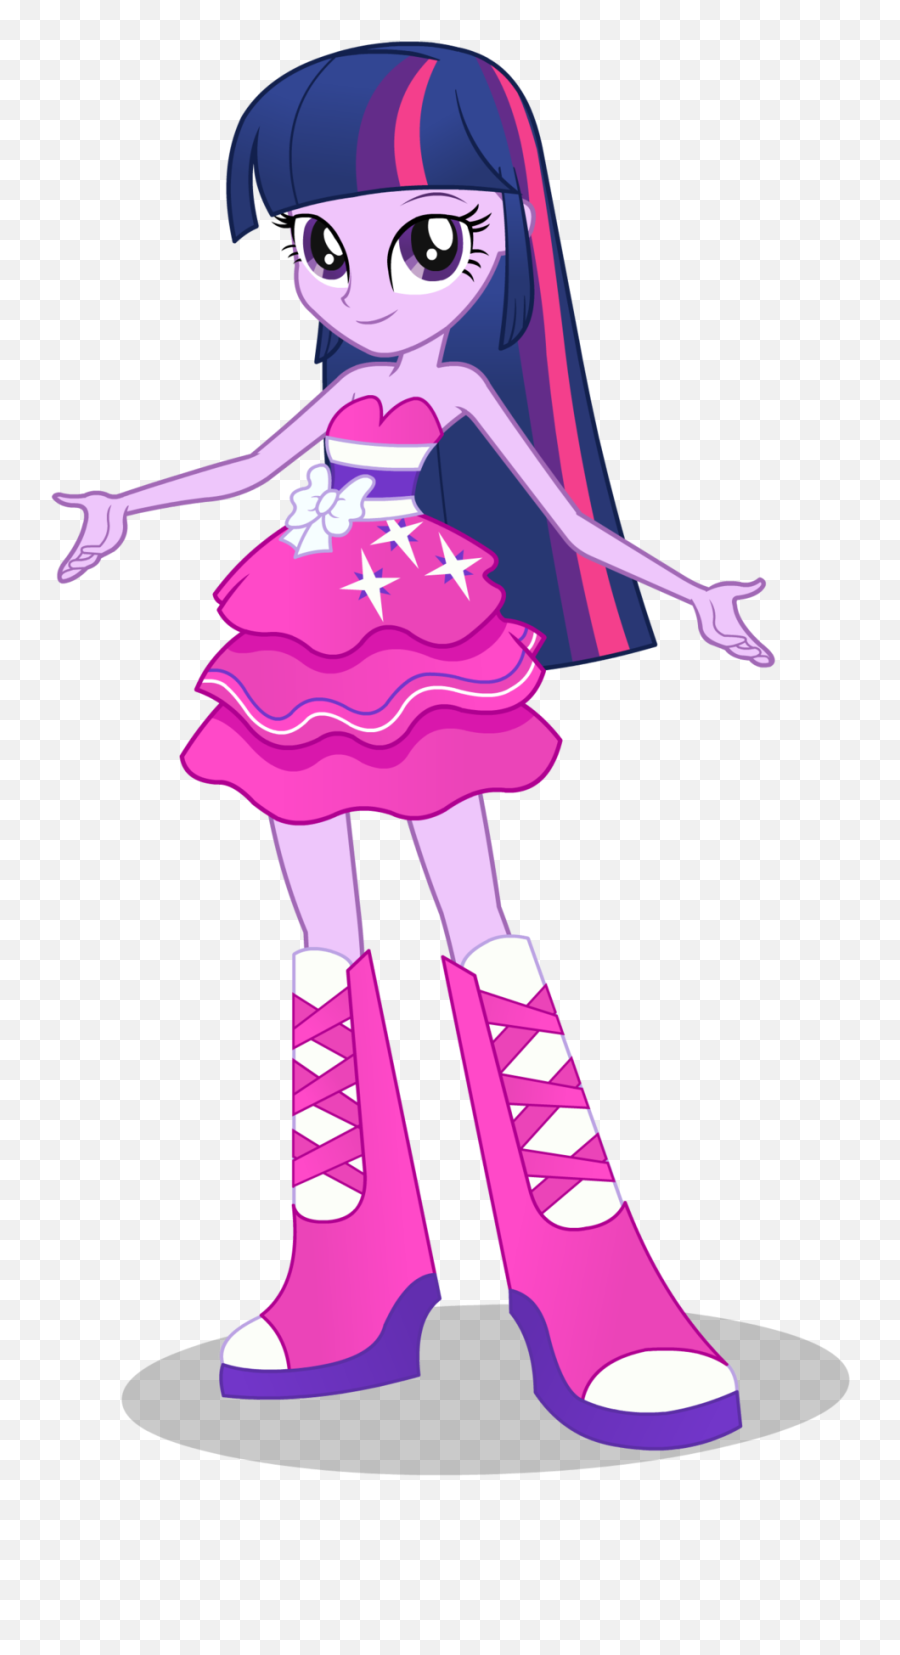 Dress Twilight Sparkle As Graphic - My Little Pony Equestria Girls Twilight Sparkle Png,Twilight Sparkle Png